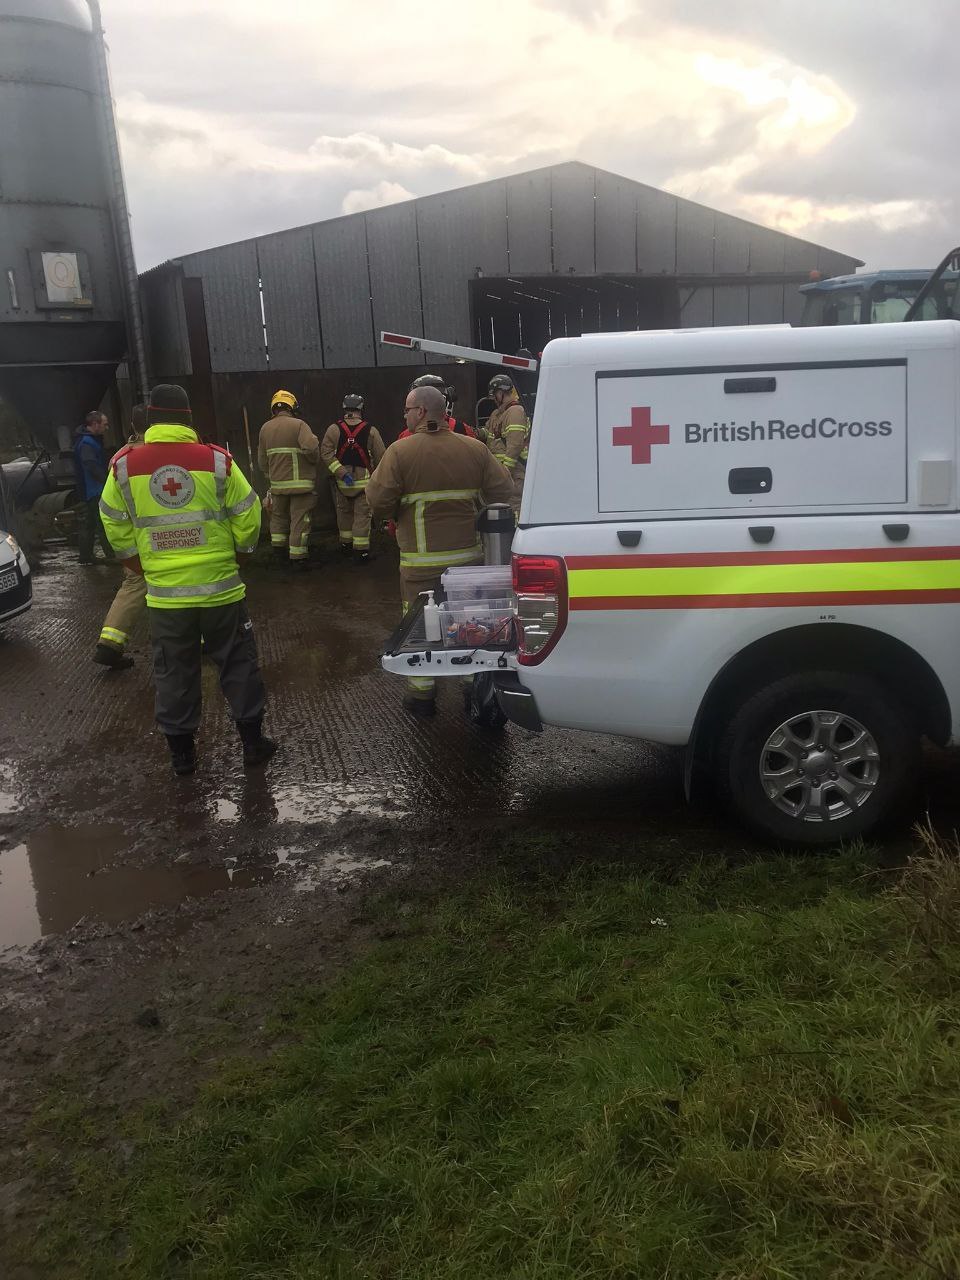 NIFRS personnel attending an incident at the Lettermoney Road, Irvinestown where six cattle had fallen into a slurry tank. Photo: NiResponsevids Twitter.